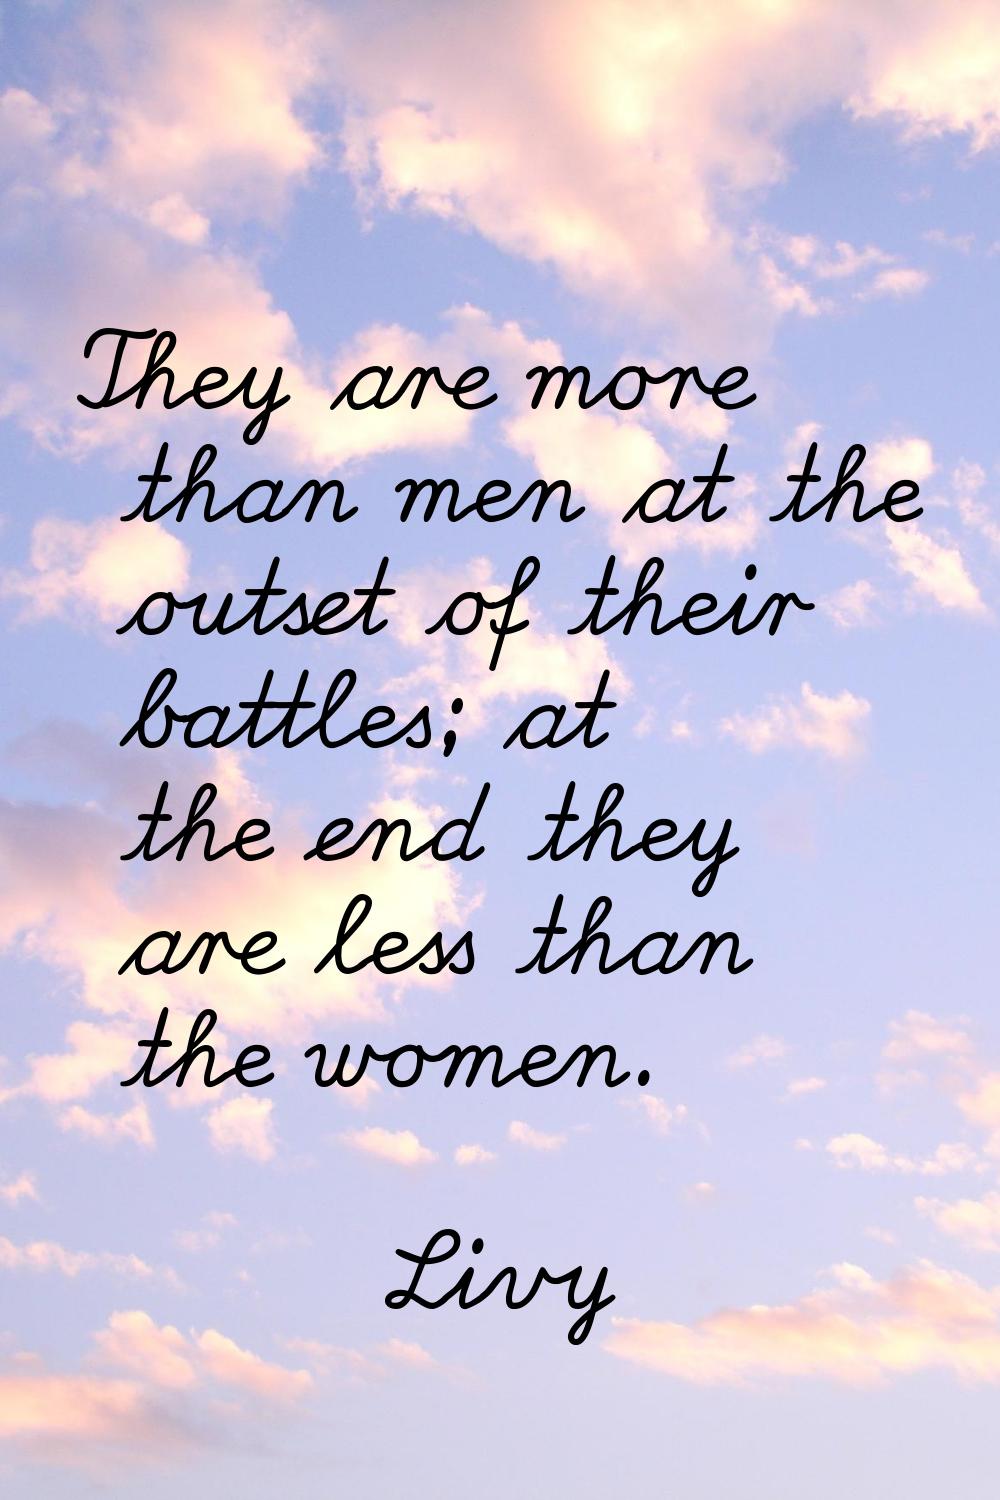 They are more than men at the outset of their battles; at the end they are less than the women.